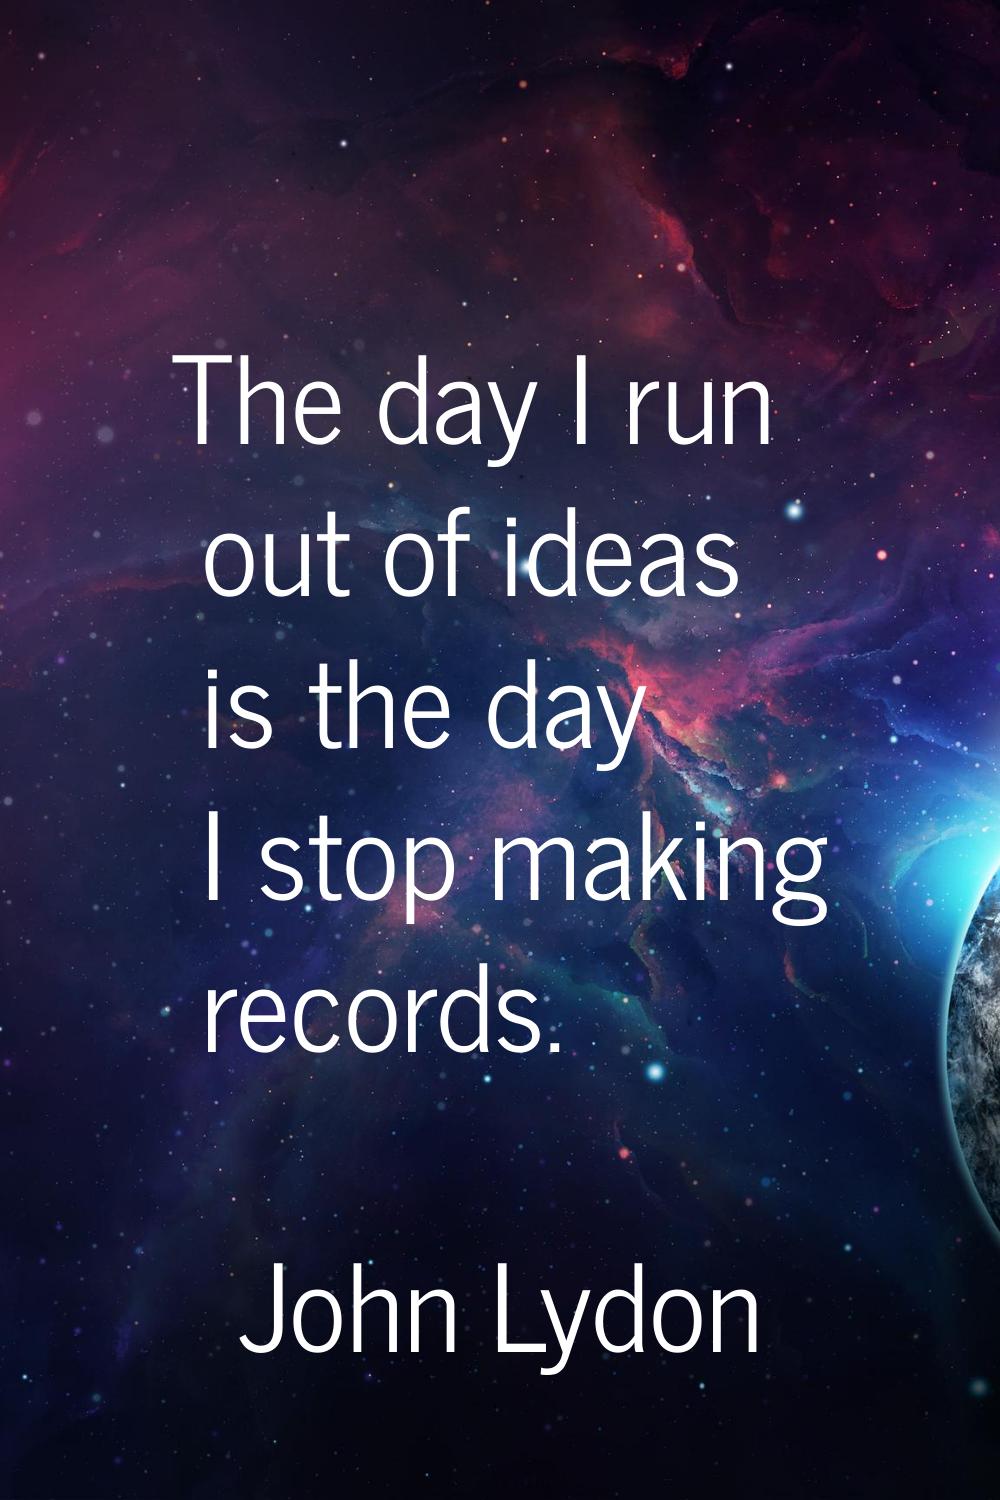 The day I run out of ideas is the day I stop making records.